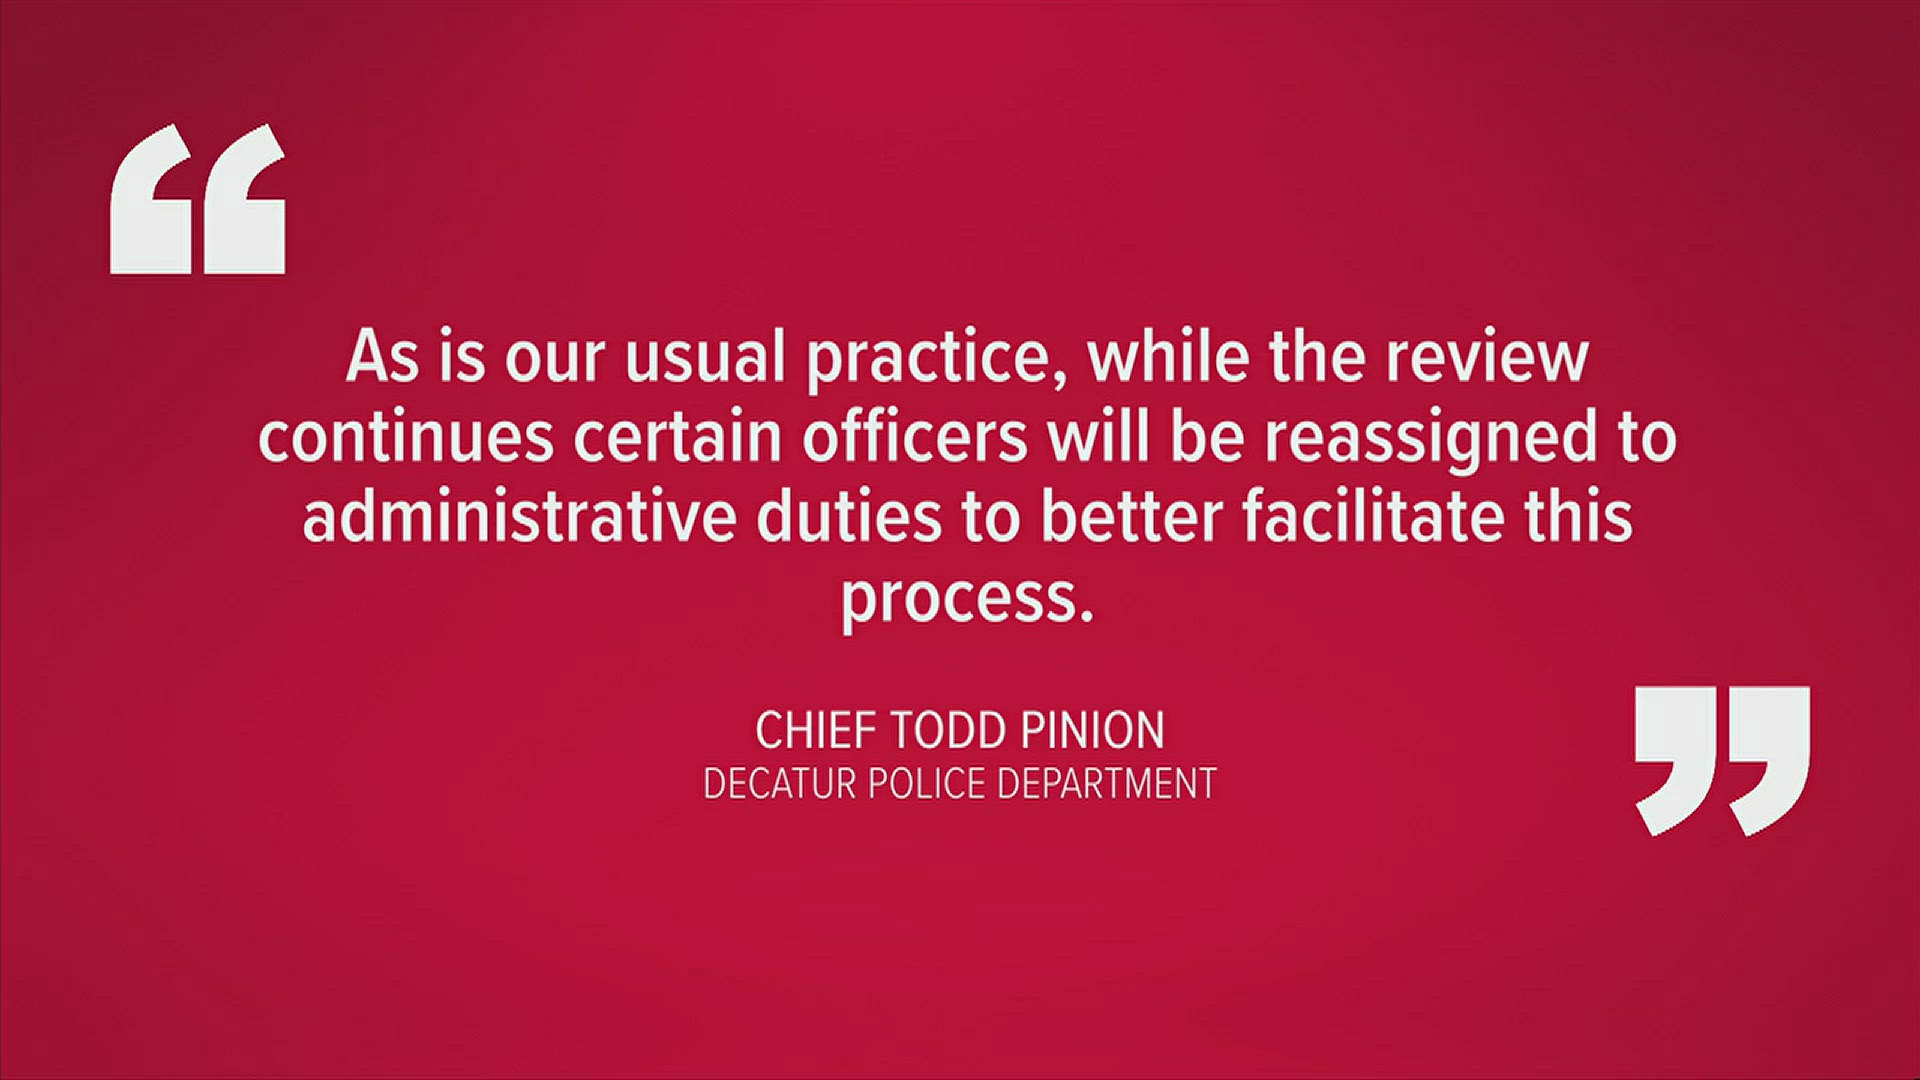 Decatur Police Chief Todd Pinion released a statement about investigations into possible officer misconduct.